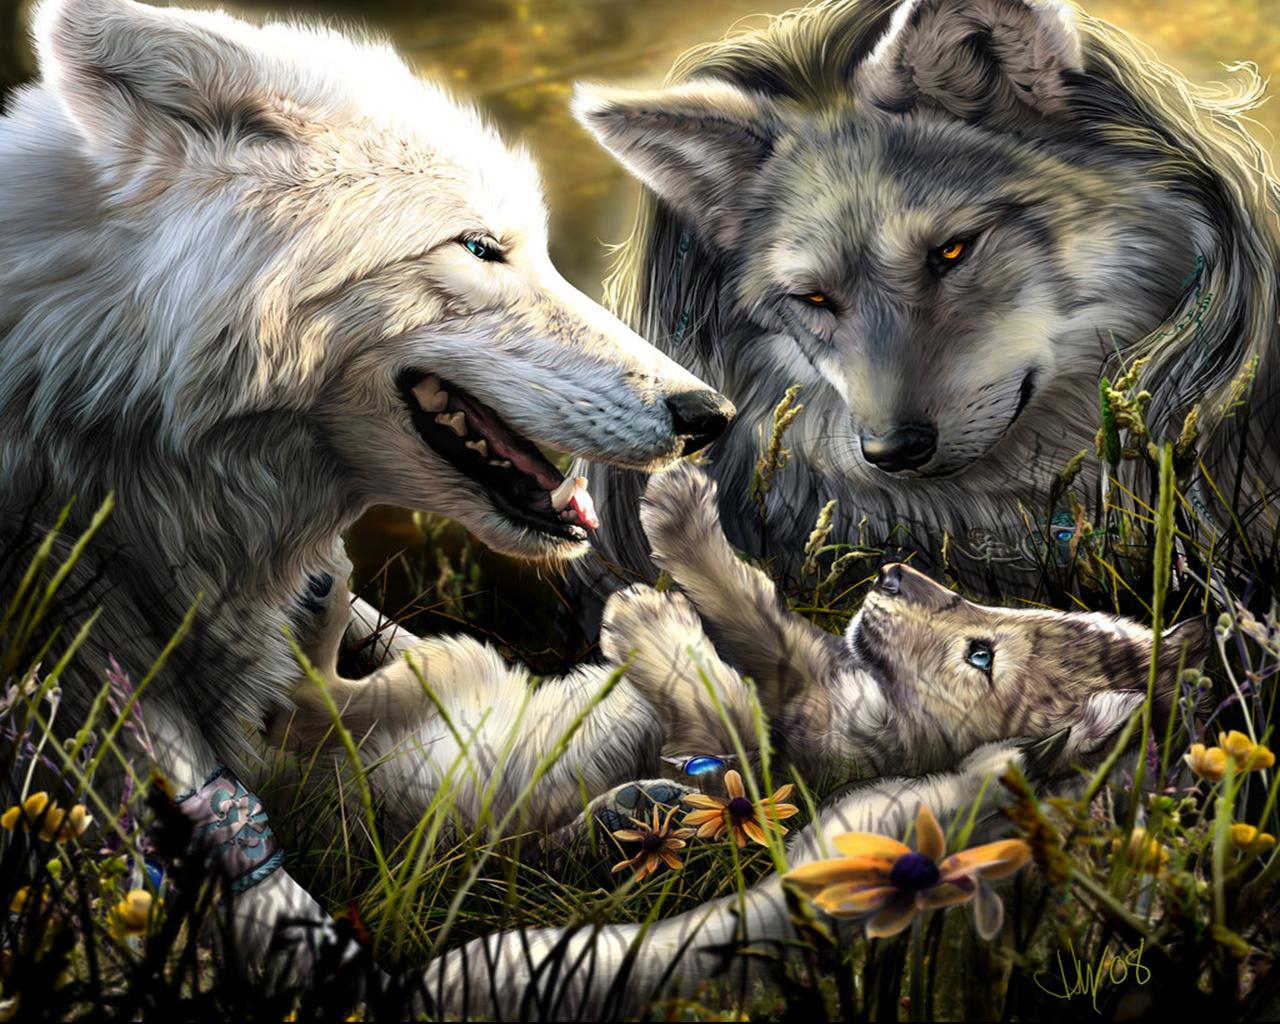 Free Download Wolves Wallpaper 3d Awesome 3d Wallpapers Of Wolf 1280x1024 For Your Desktop Mobile Tablet Explore 47 3d Wolf Wallpaper Free Wolf Wallpaper Wolves Wallpapers For Desktop Wolf Wallpaper